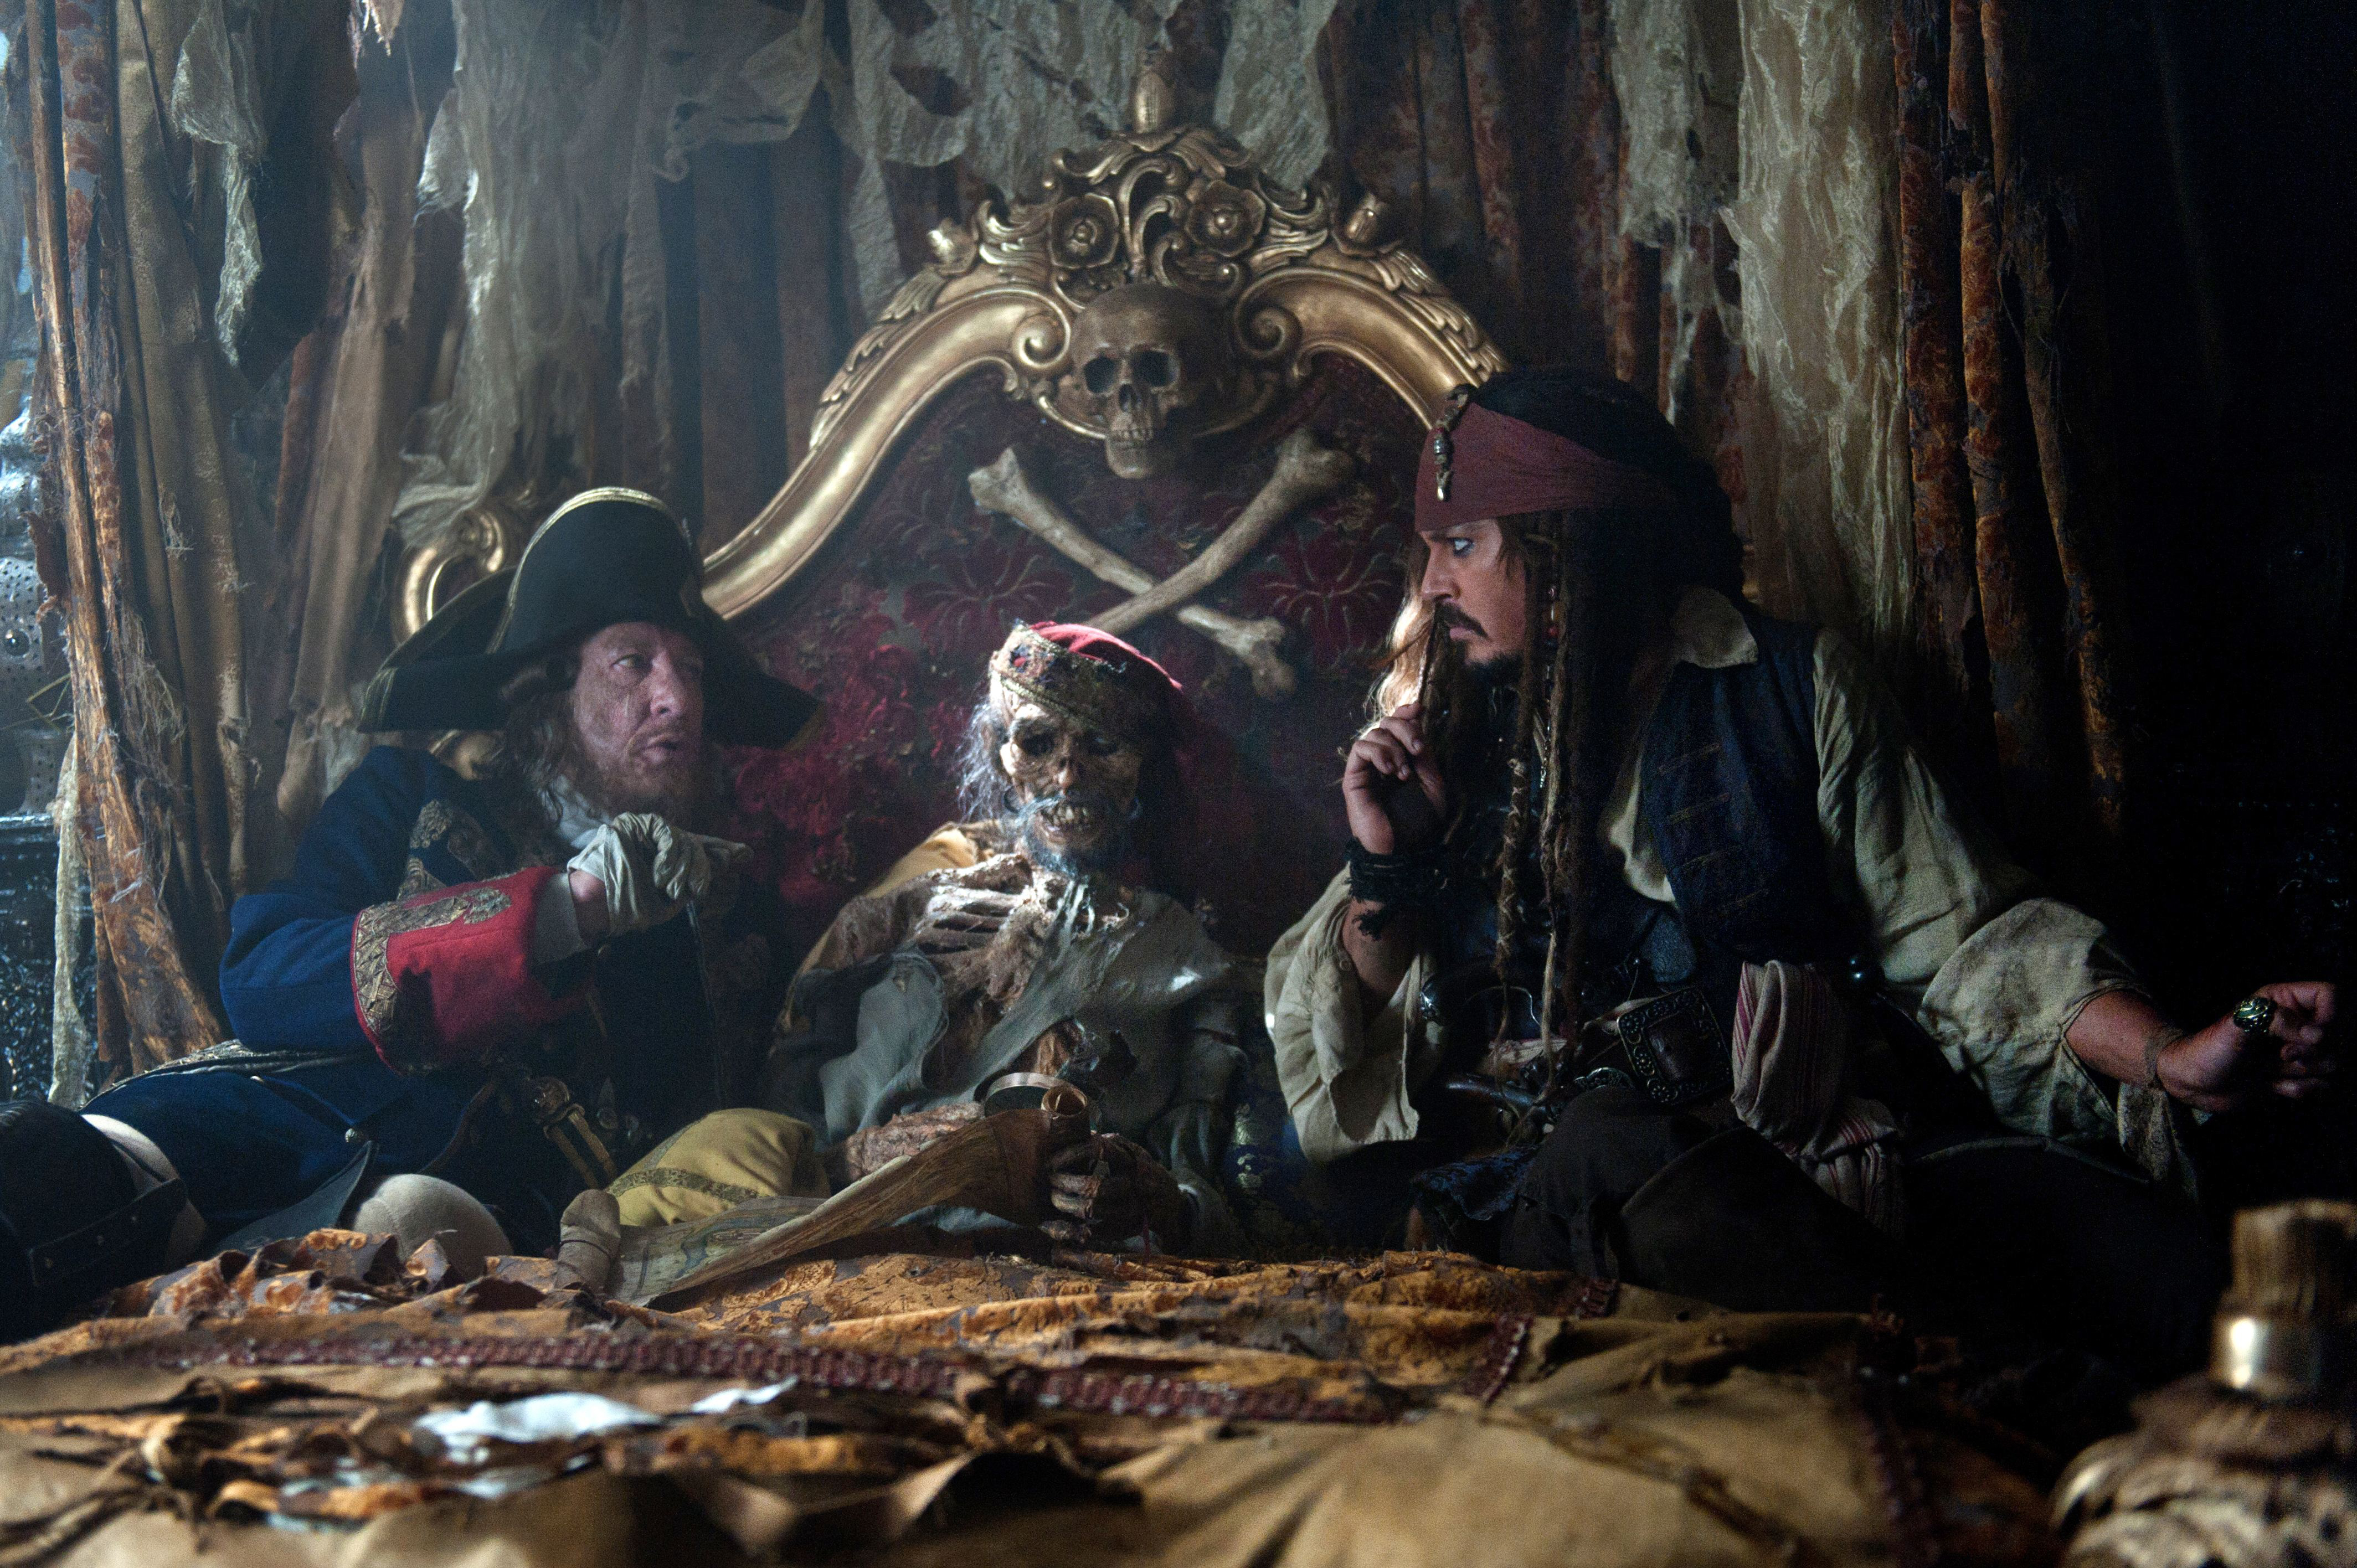 jack sparrow, pirates of the caribbean: on stranger tides, pirates of the caribbean, movie, geoffrey rush, hector barbossa, johnny depp